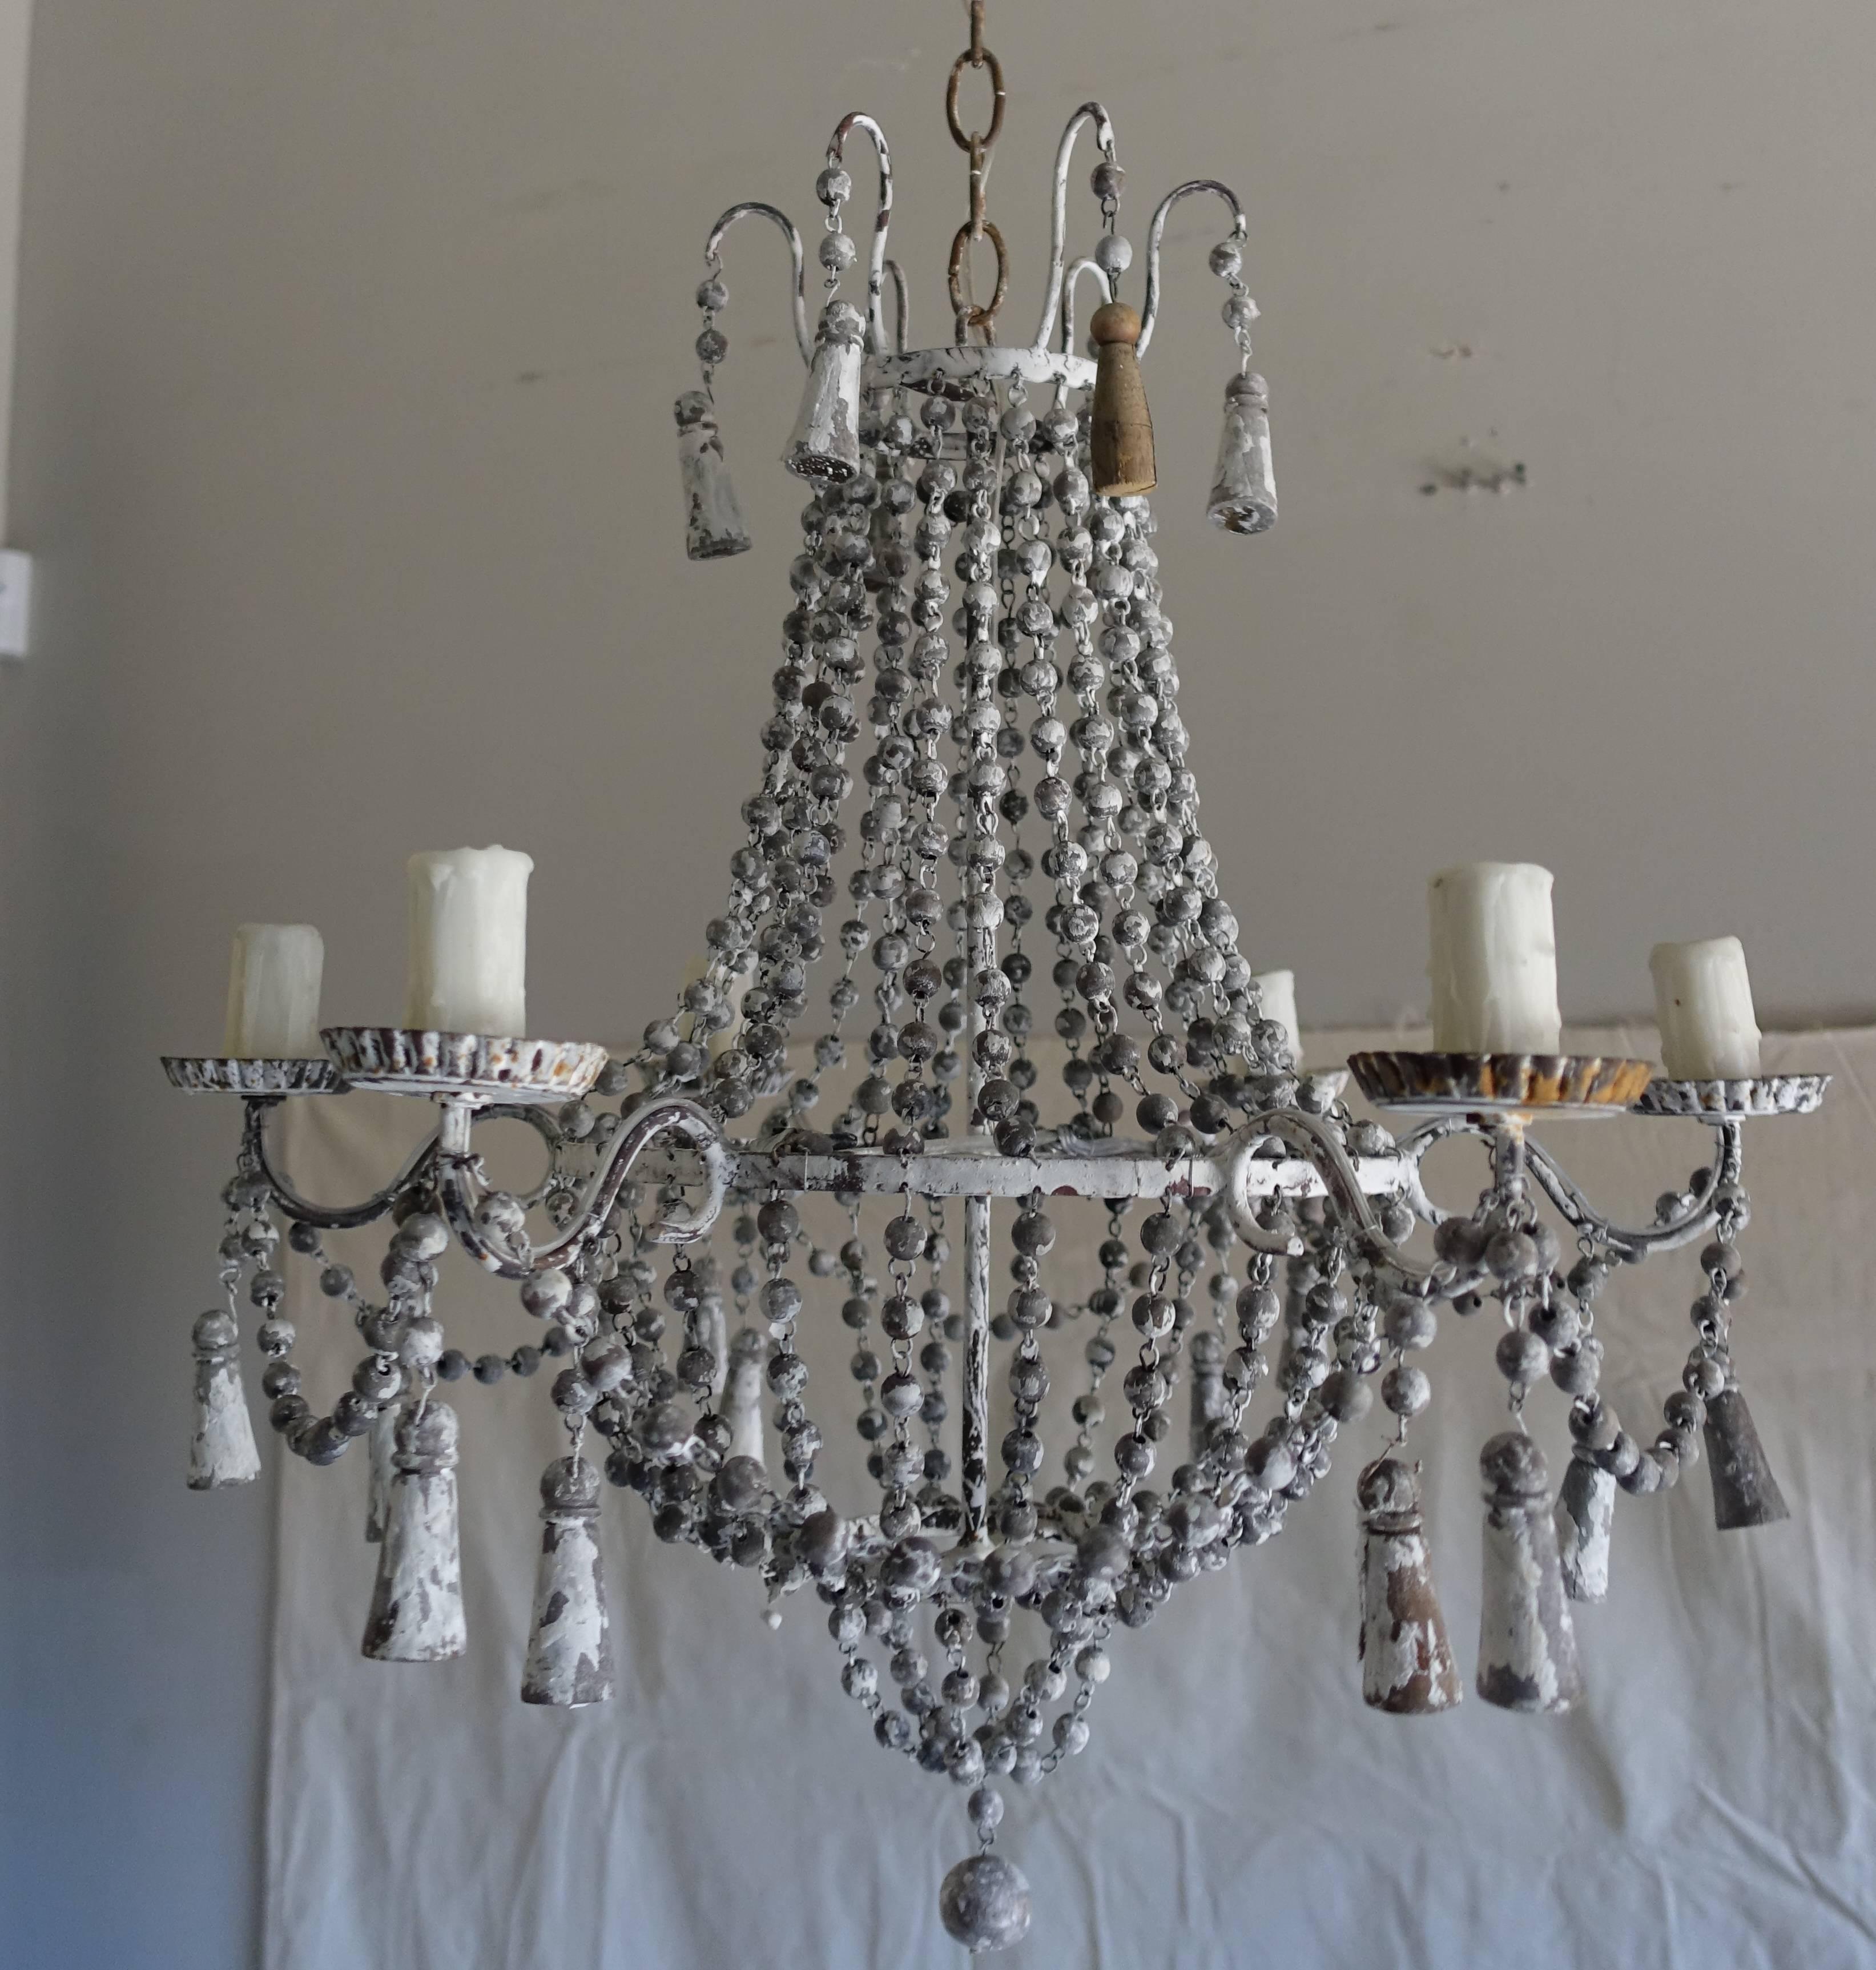 Italian six-light painted wood beaded chandelier with wood tassels throughout. Newly rewired with drip wax candle covers. Includes chain and canopy-ready to install.